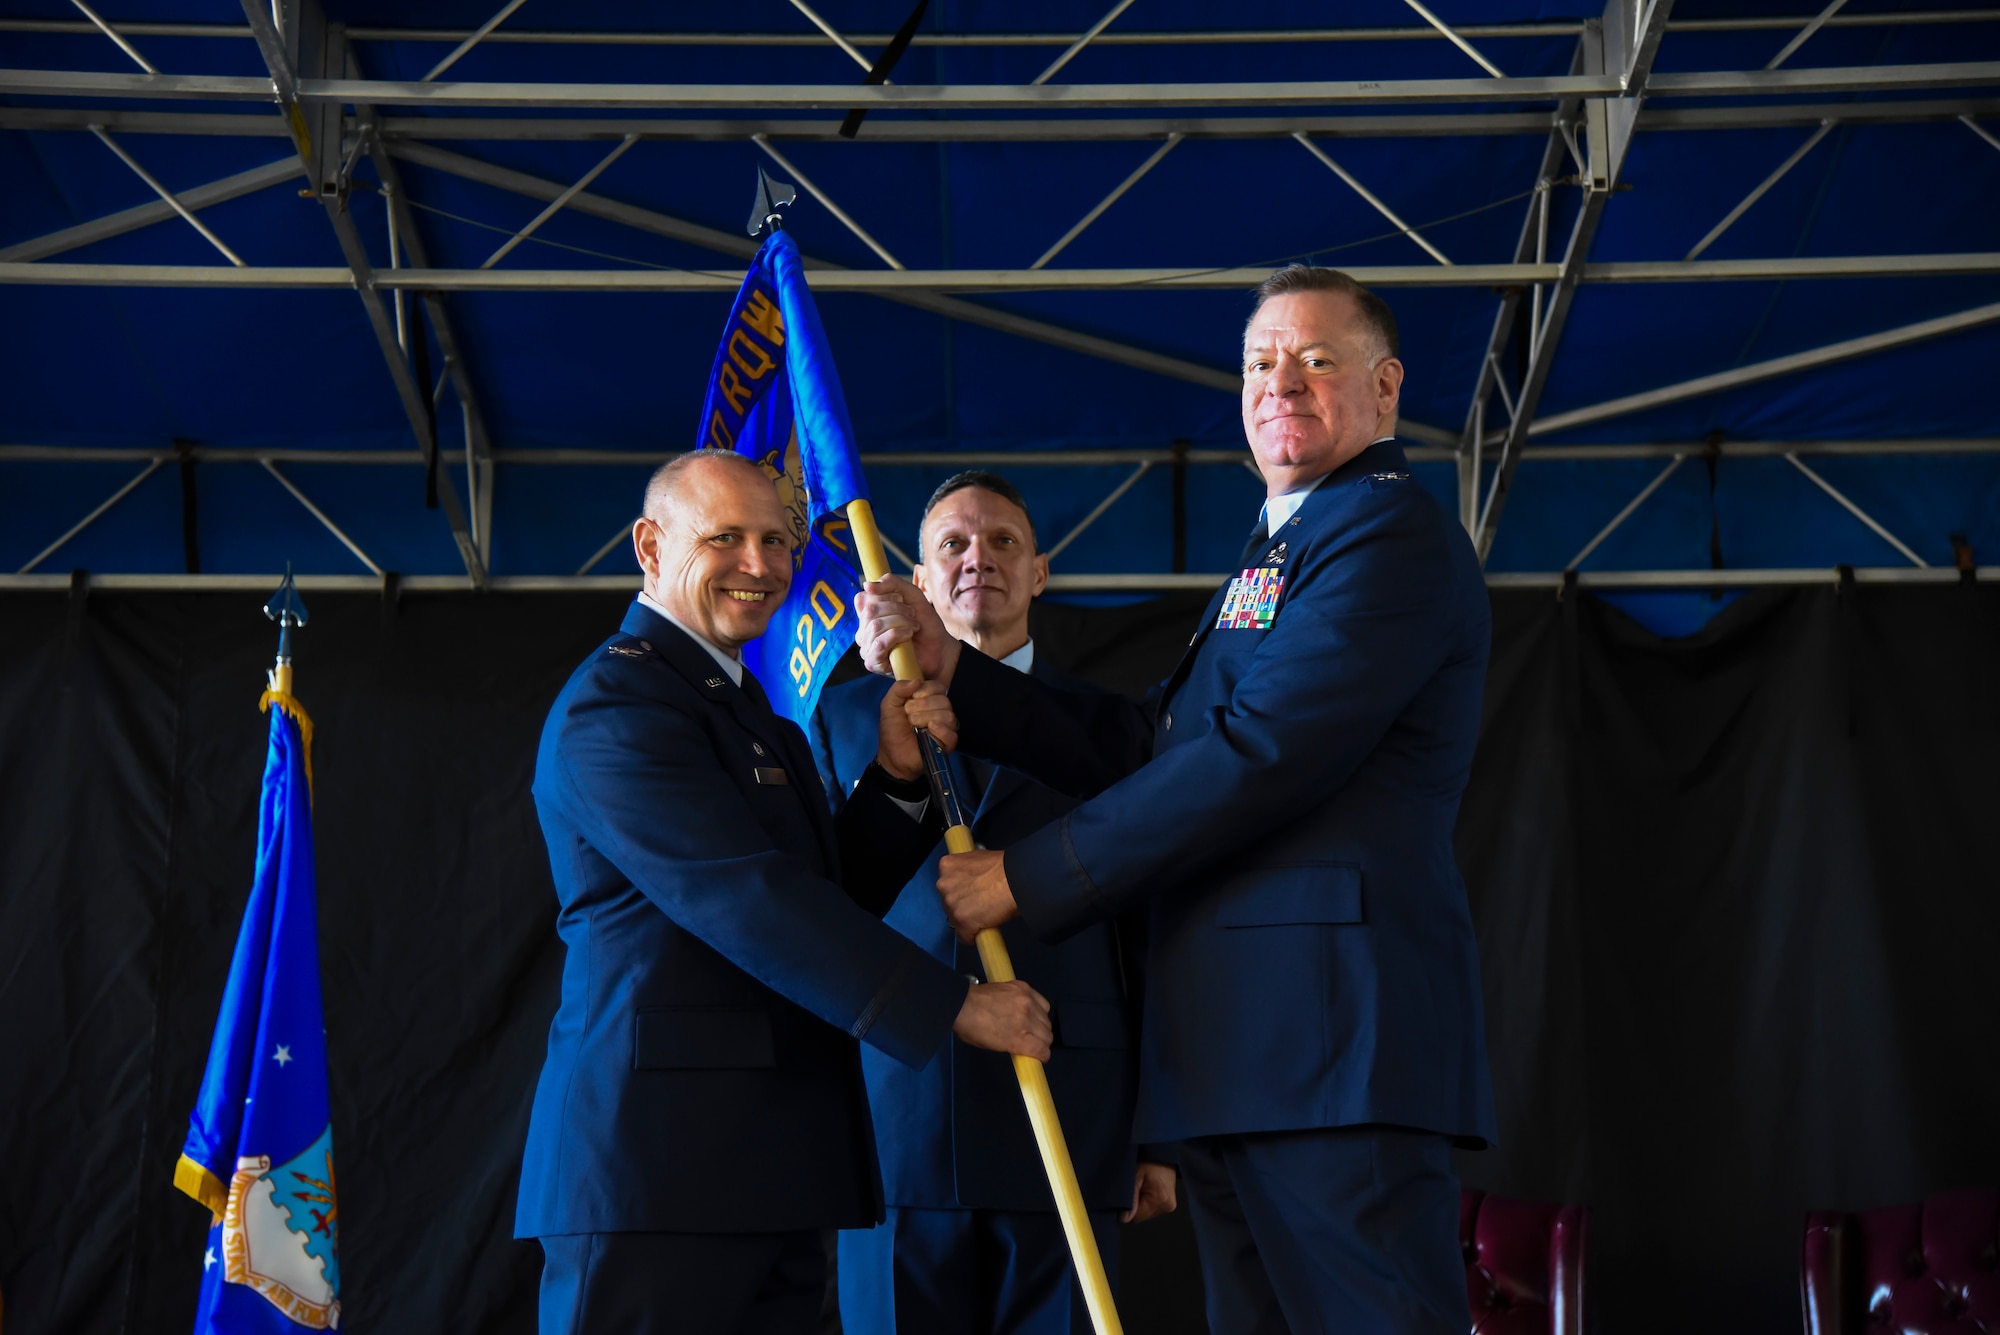 Col. Kurt Matthews (left), 920th Rescue Wing Commander, hands Col. Leo J. Kamphaus, Jr. (right) the 920th Maintenance Group guidon, officially recognizing Kamphaus’ assumption of command over the maintenance group. The ceremony is a common staple in military units around the world. (U.S. Air Force photo by Senior Airman Brandon Kalloo Sanes)